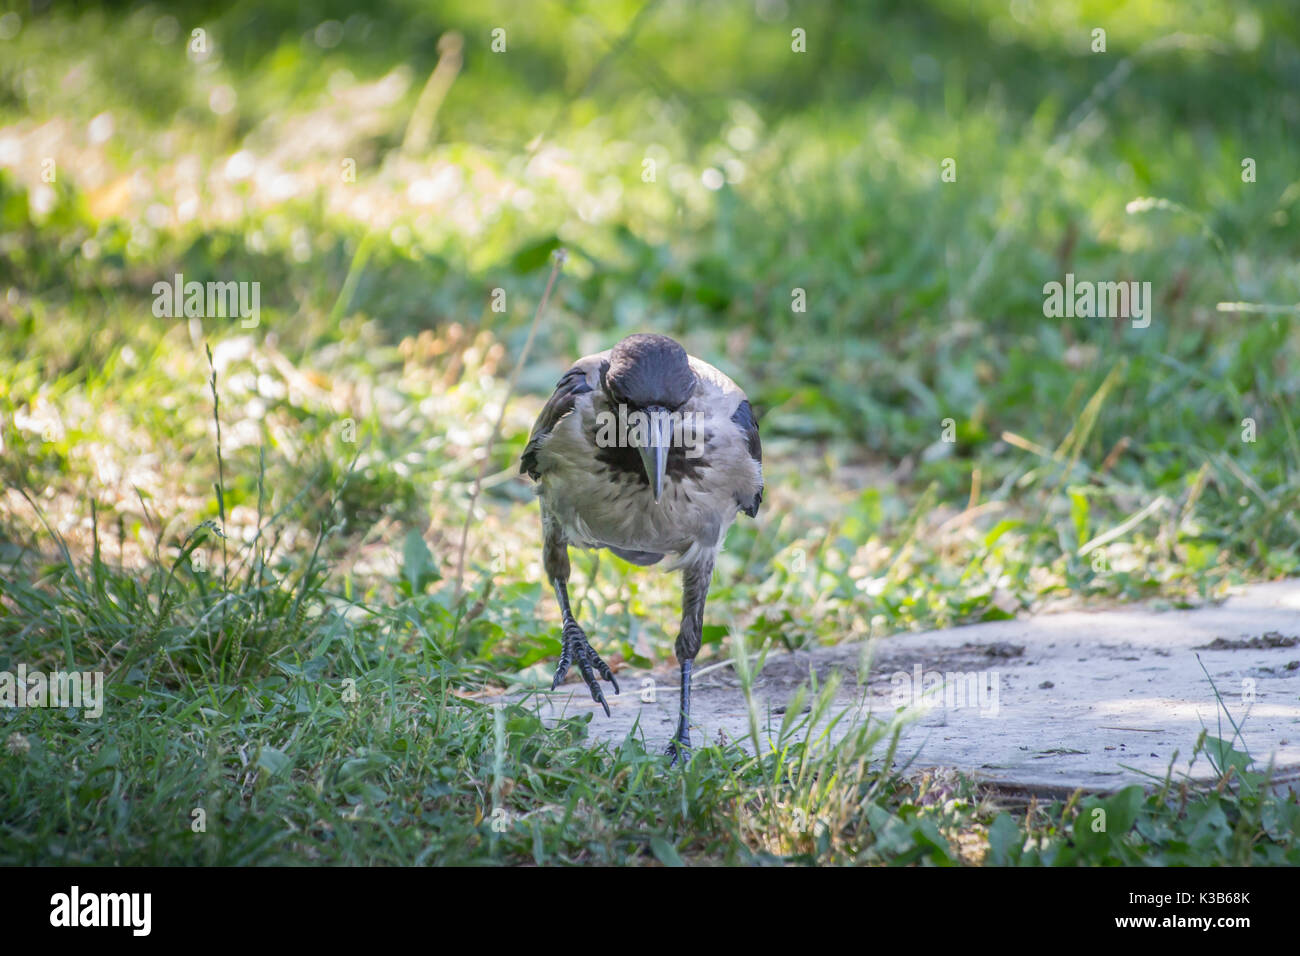 Black and Gray Colored Hooded Crow on park background Stock Photo